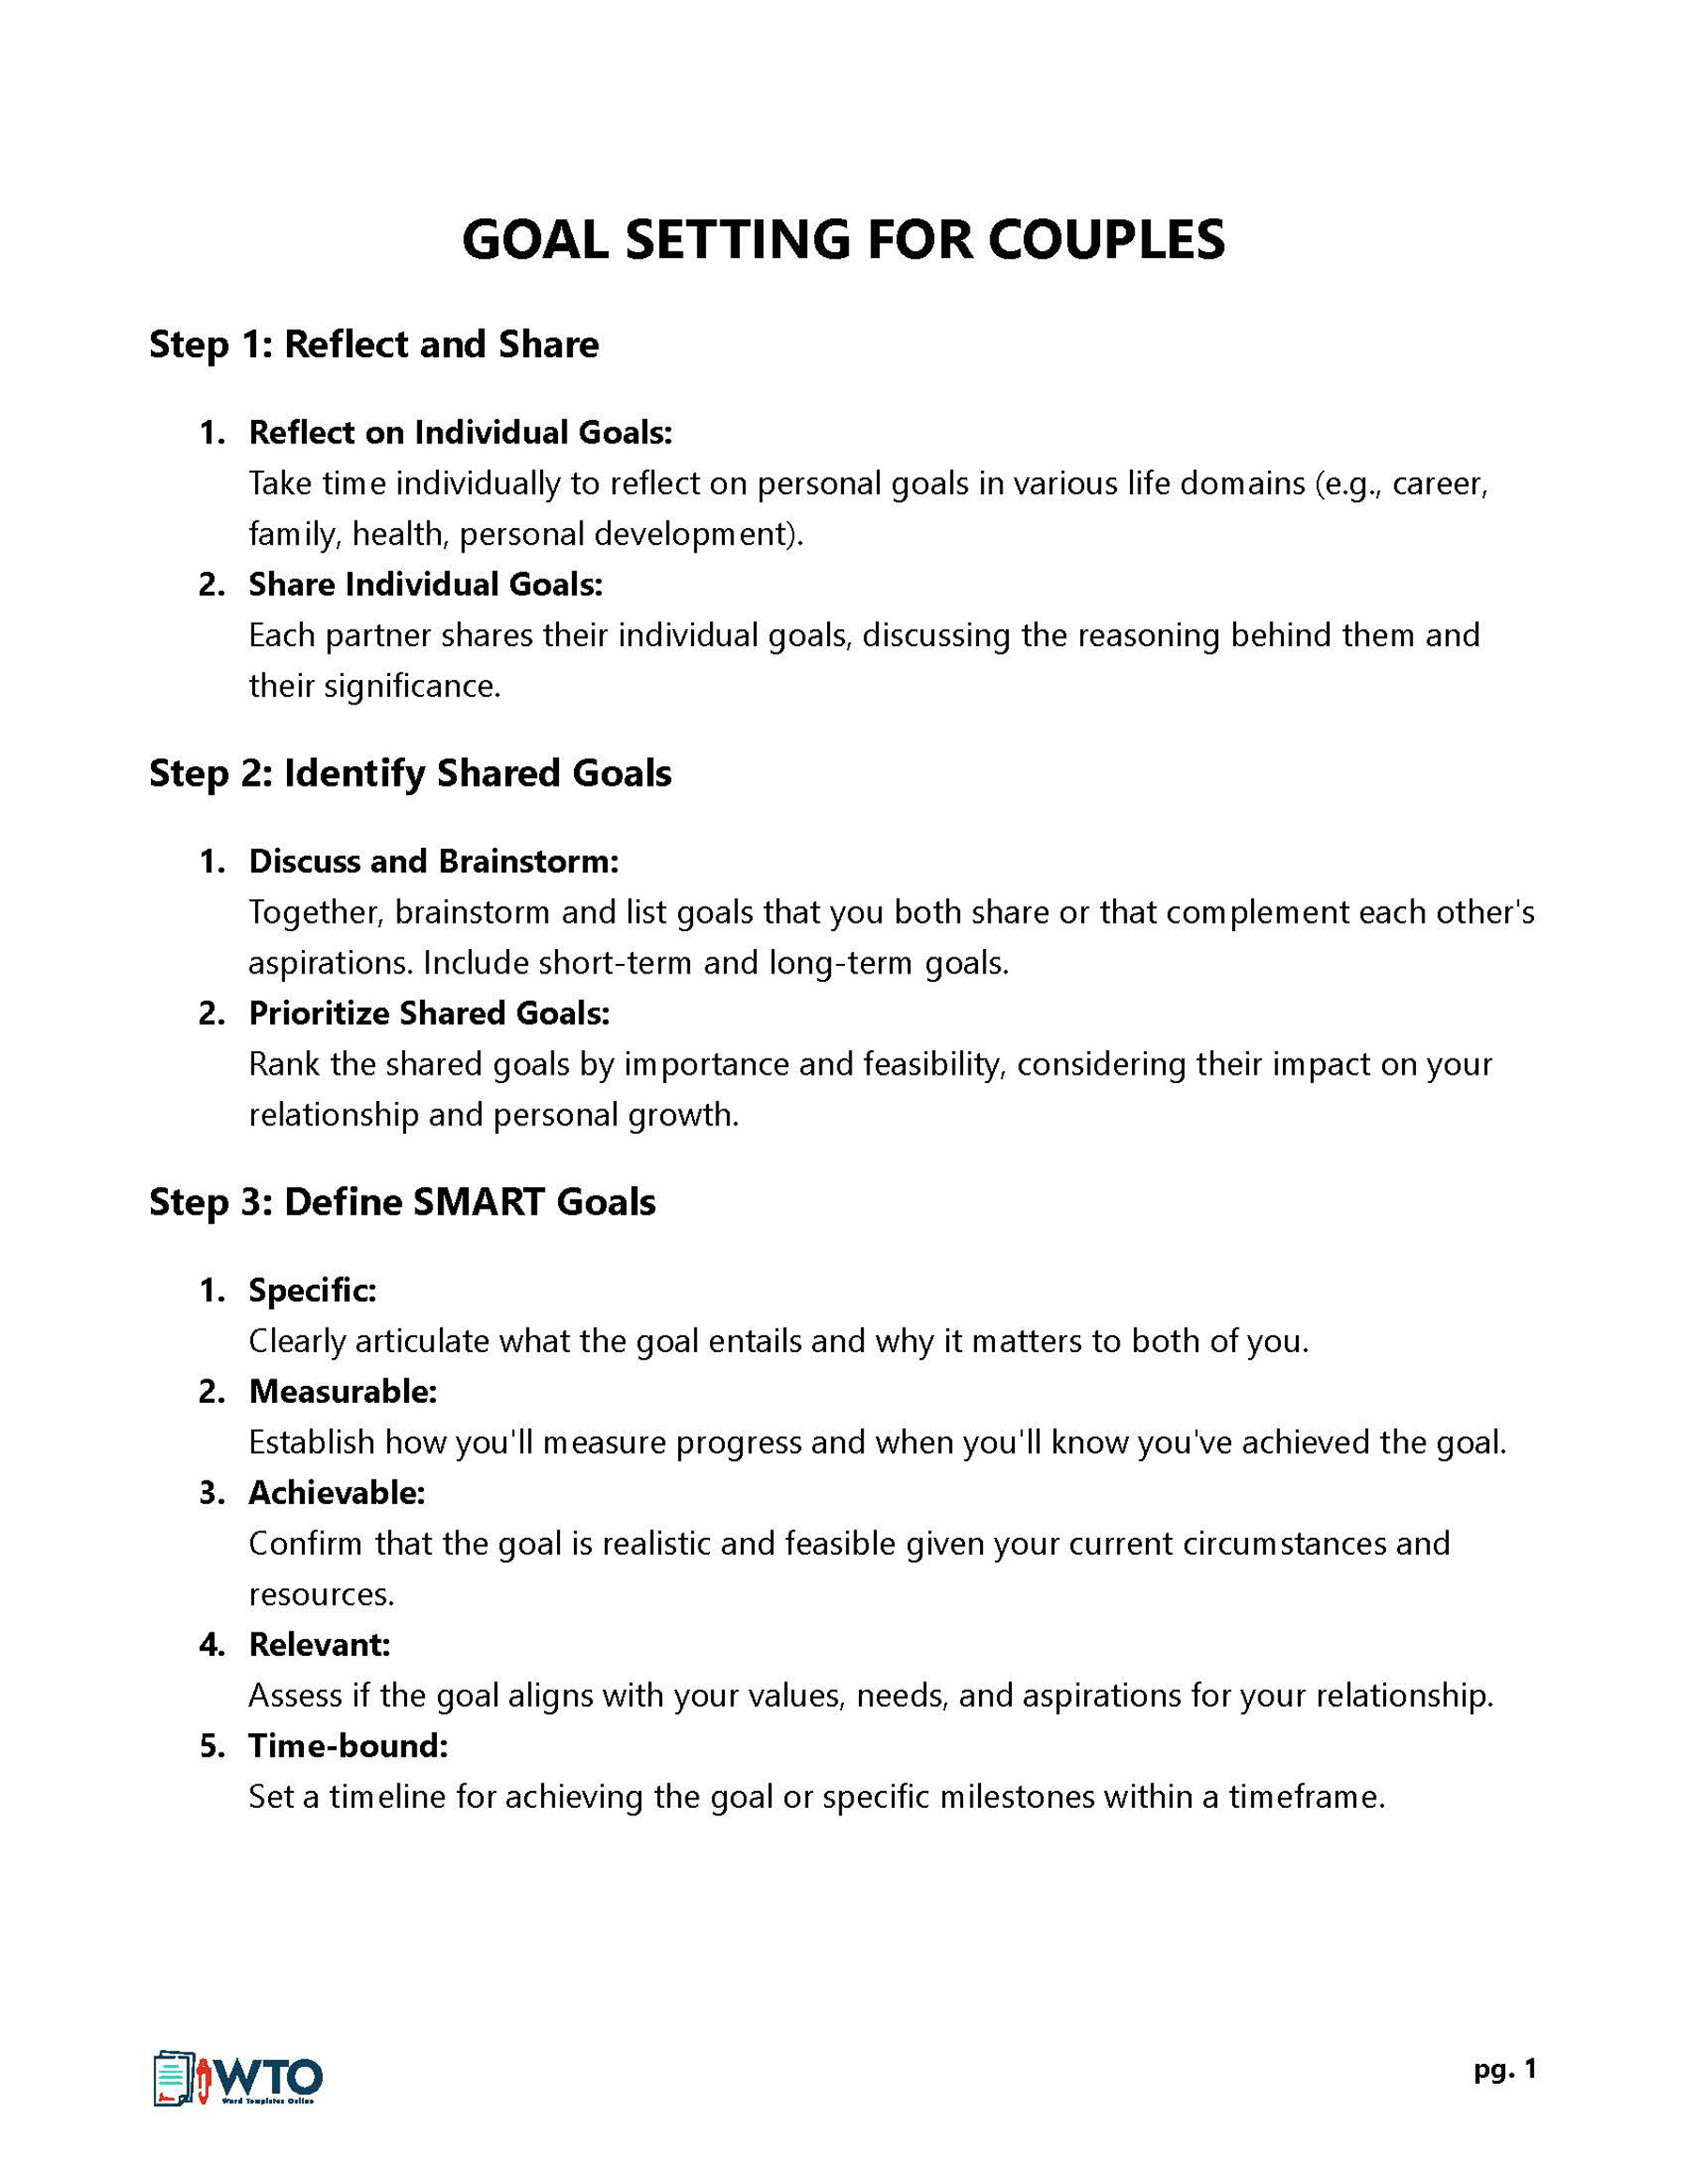 Goal Setting Worksheet for Couples Excel Format - Collaborative Planning